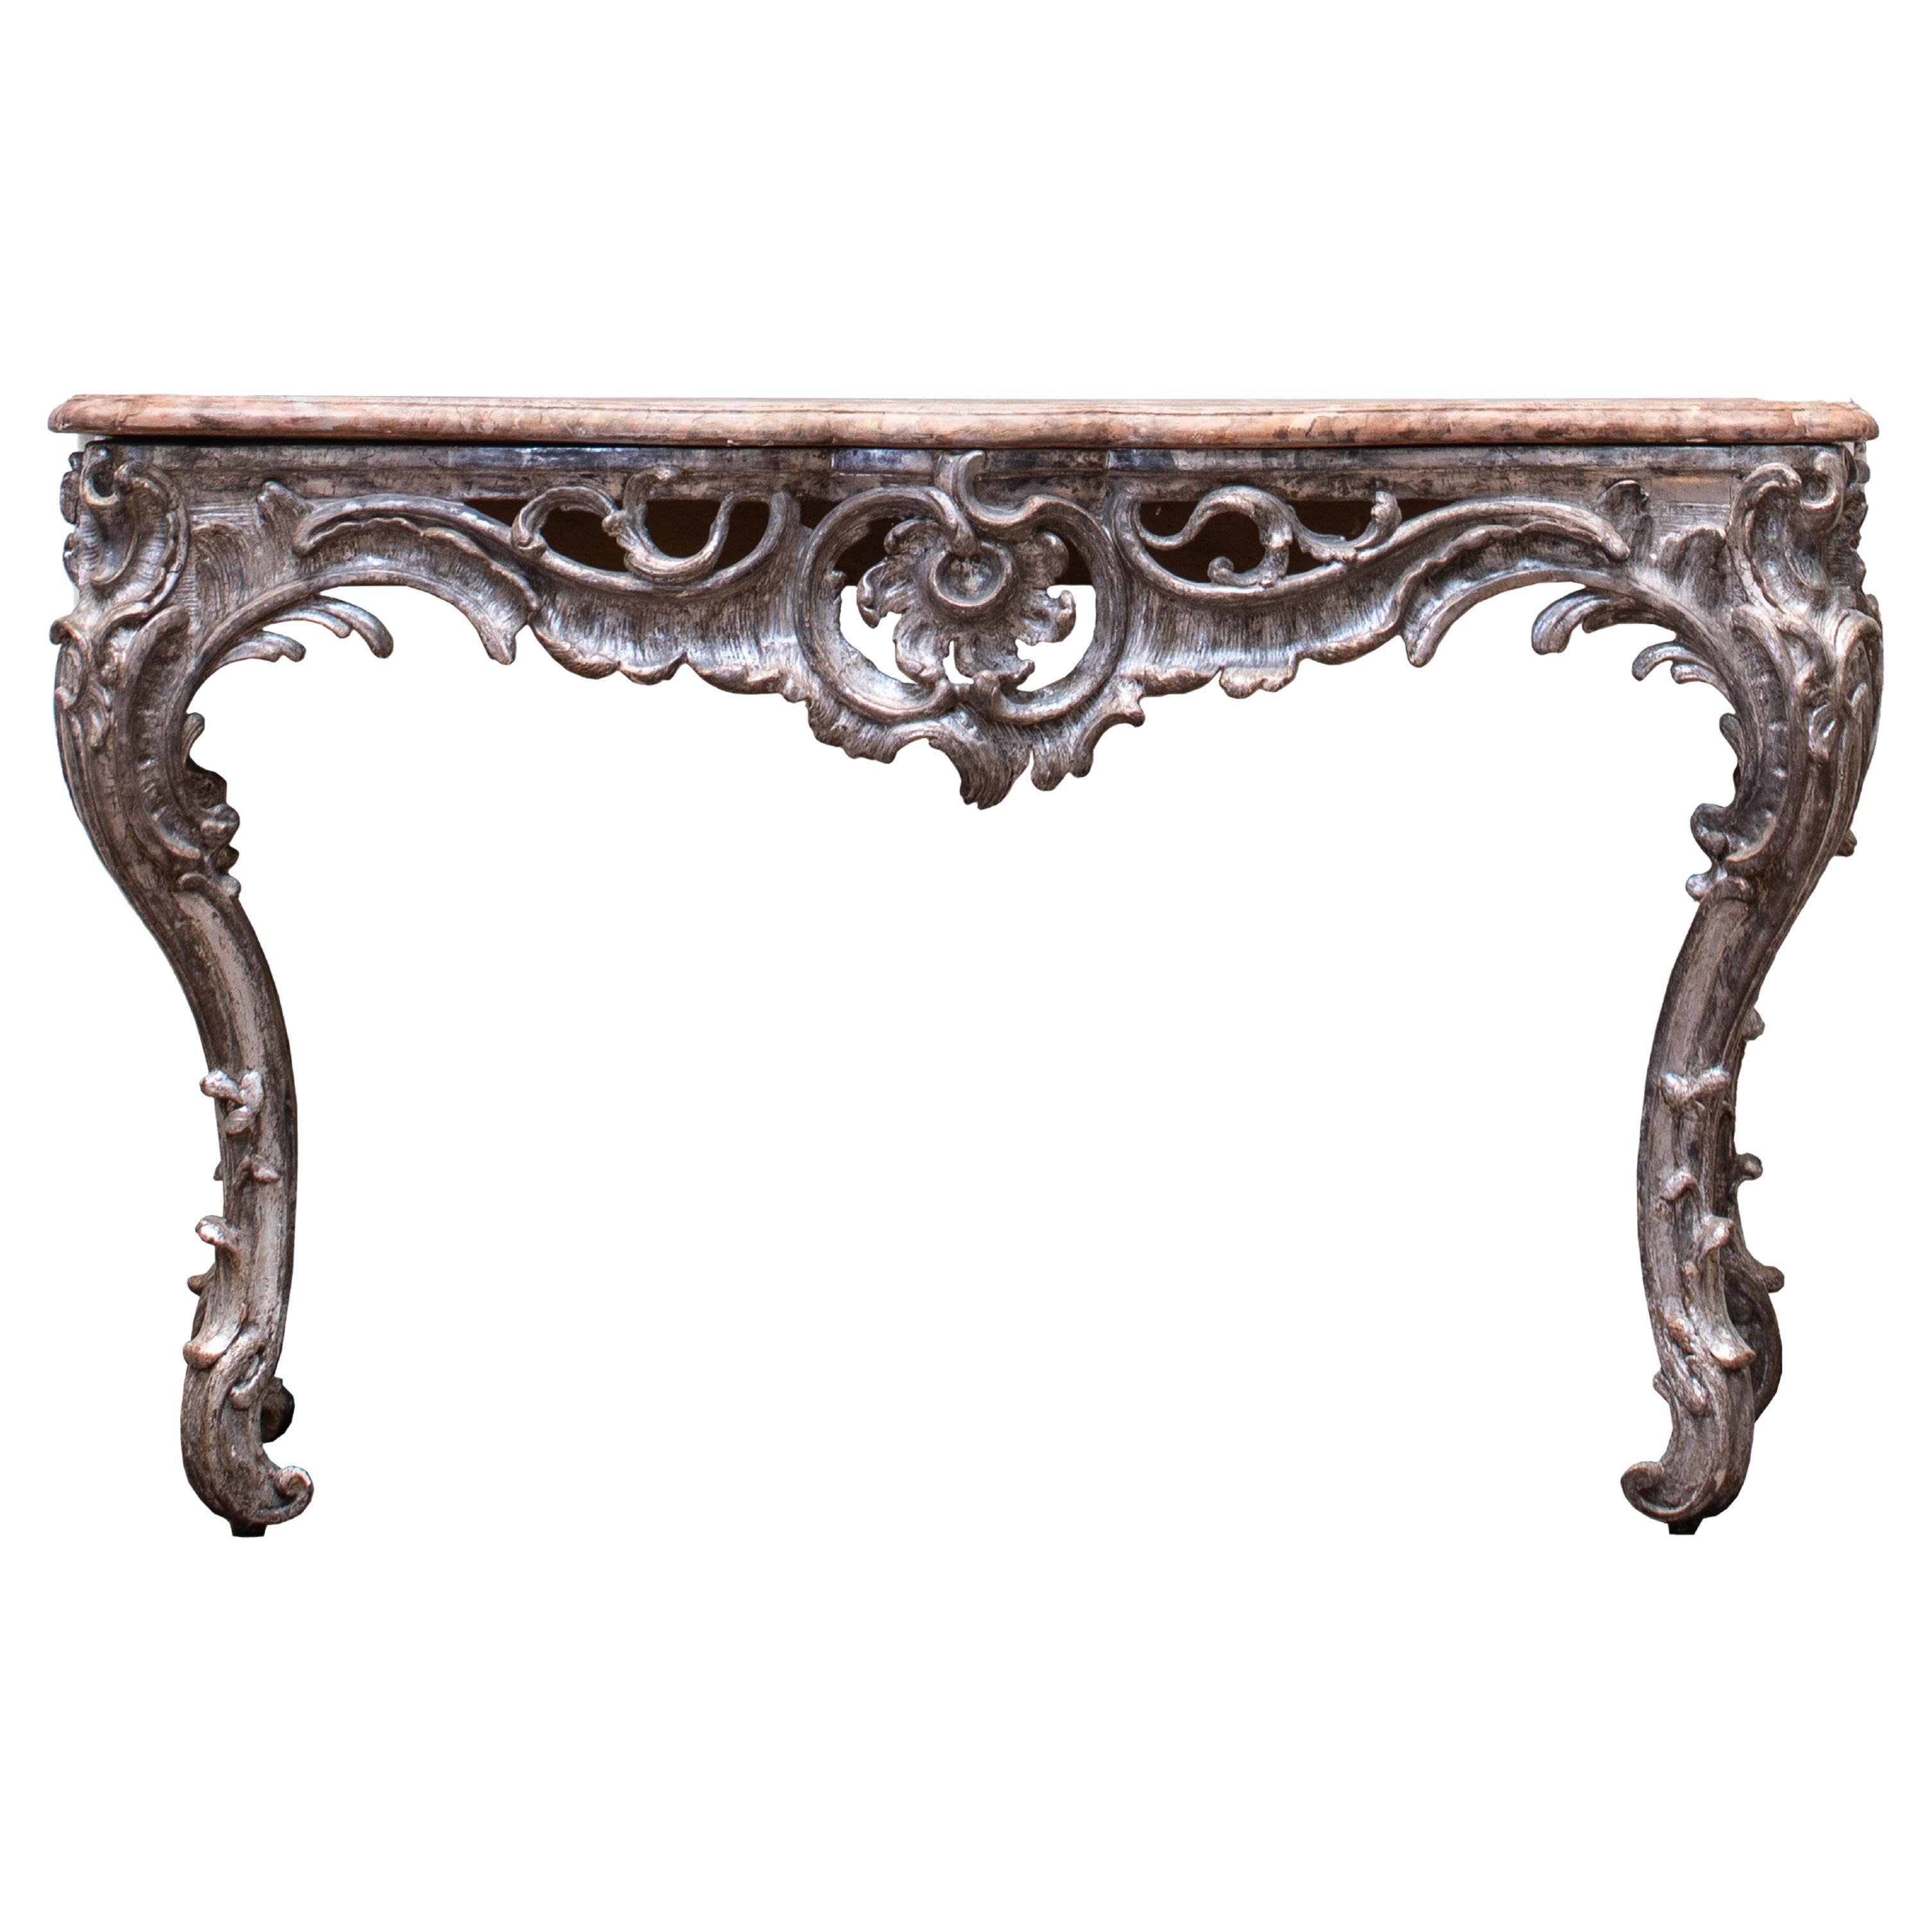 Mid-18th century Silvered Wood Carved Console in Rococo Style